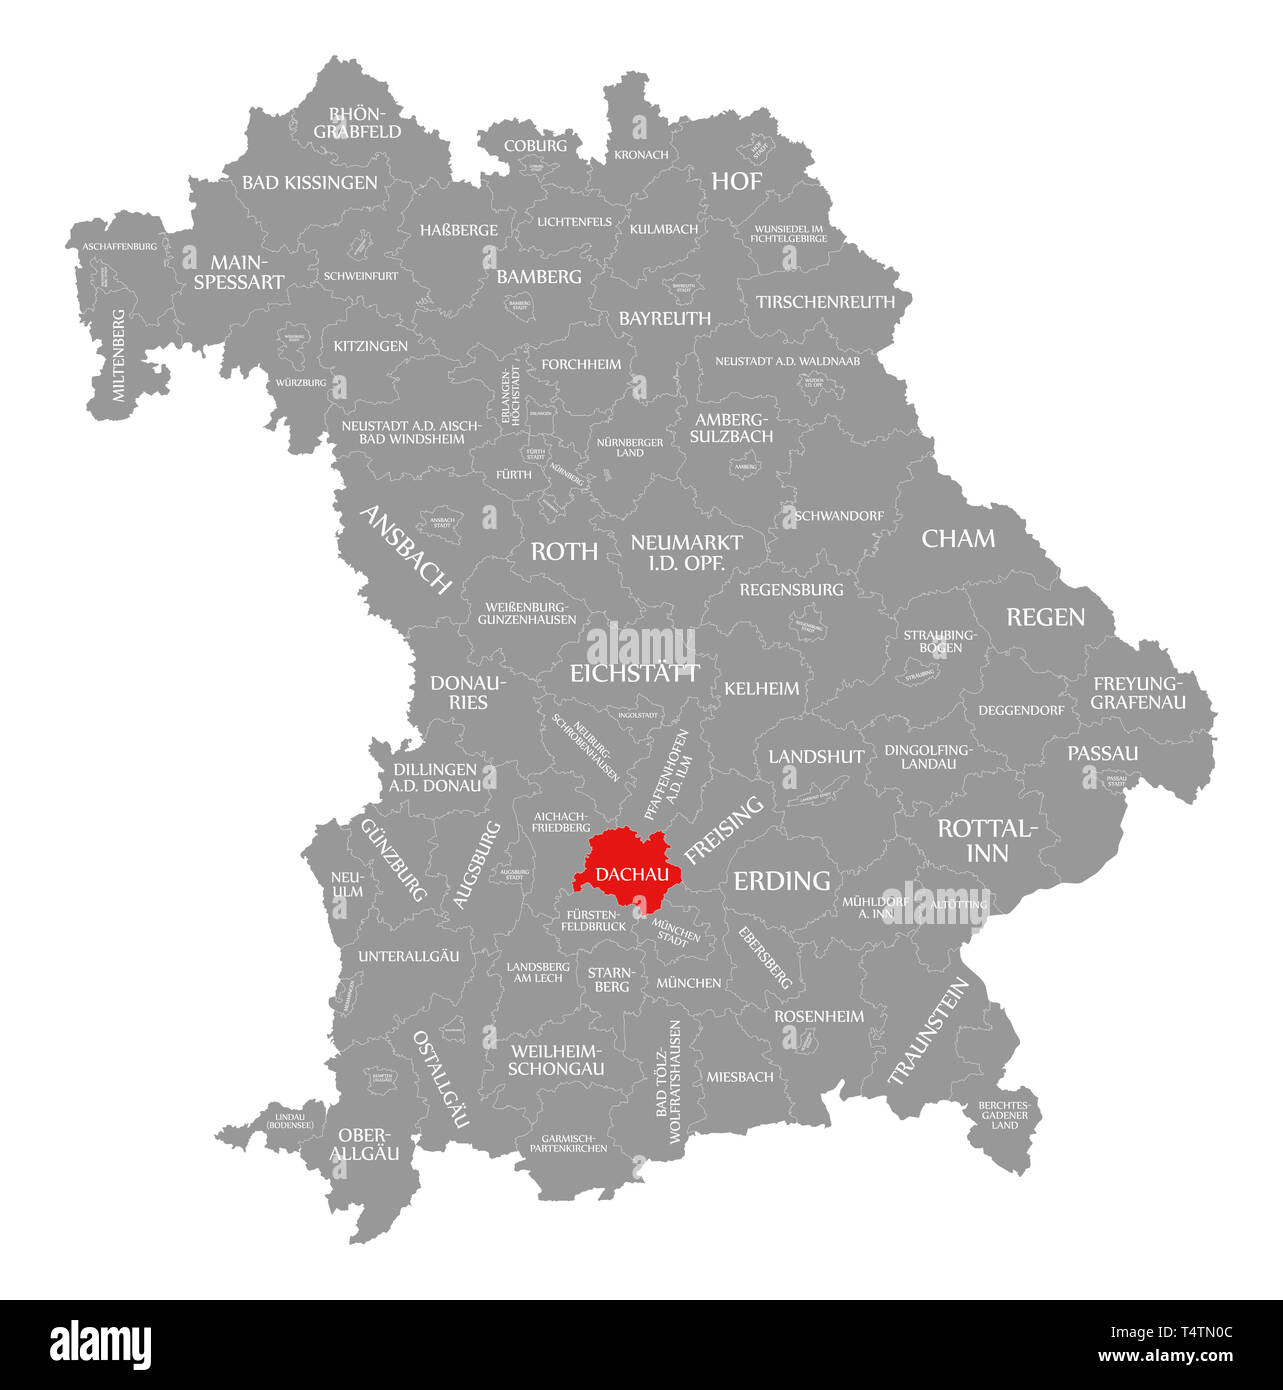 Dachau county red highlighted in map of Bavaria Germany Stock Photo